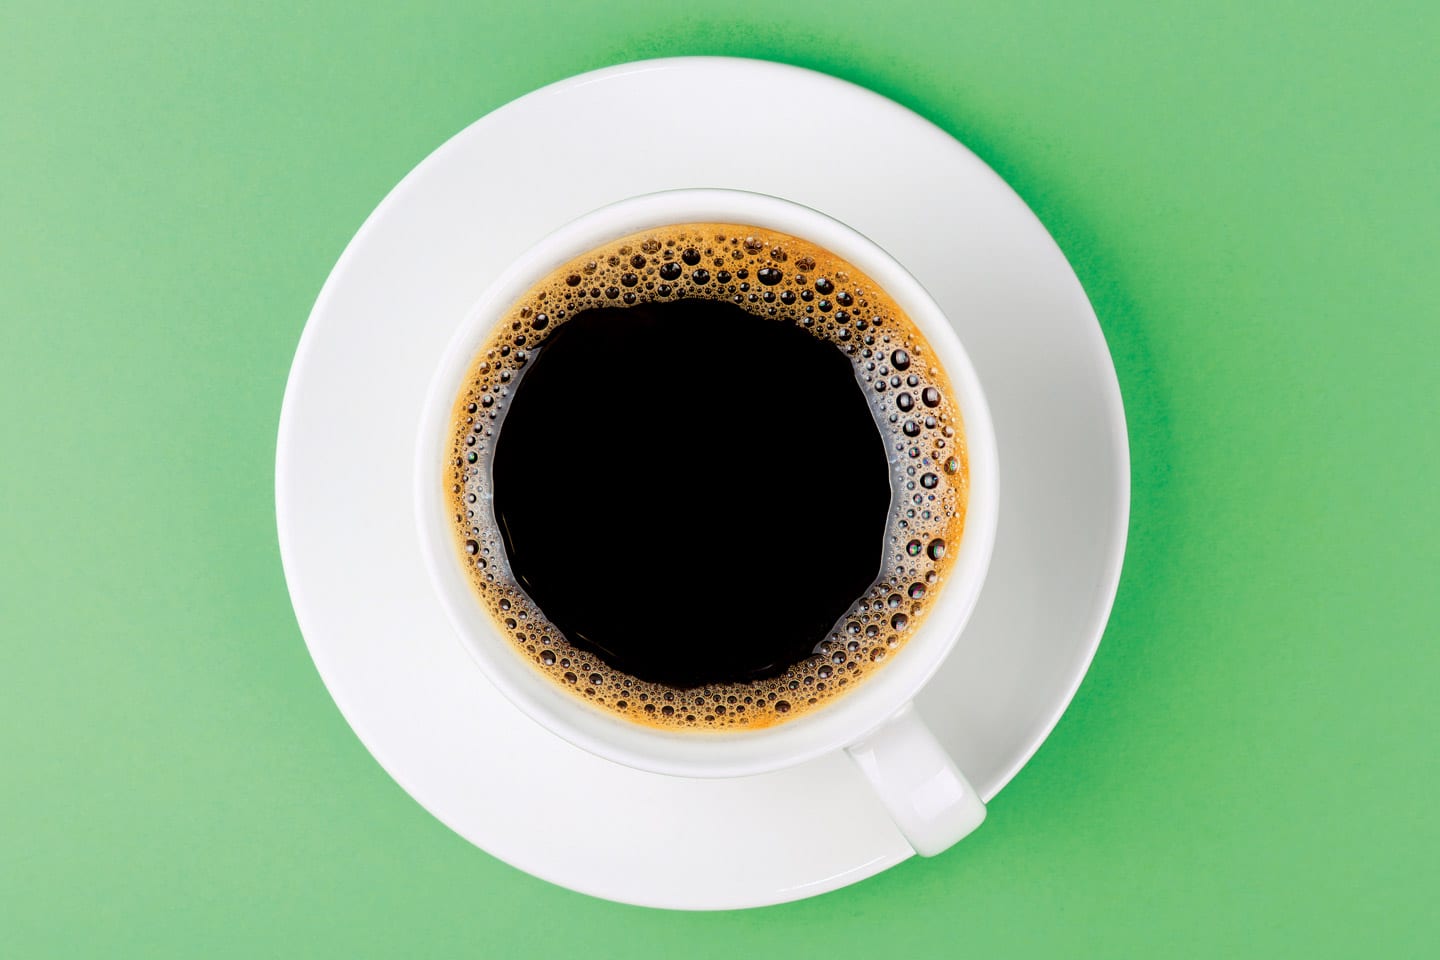 cup of black coffee in a white cup and saucer on green background in chattanooga